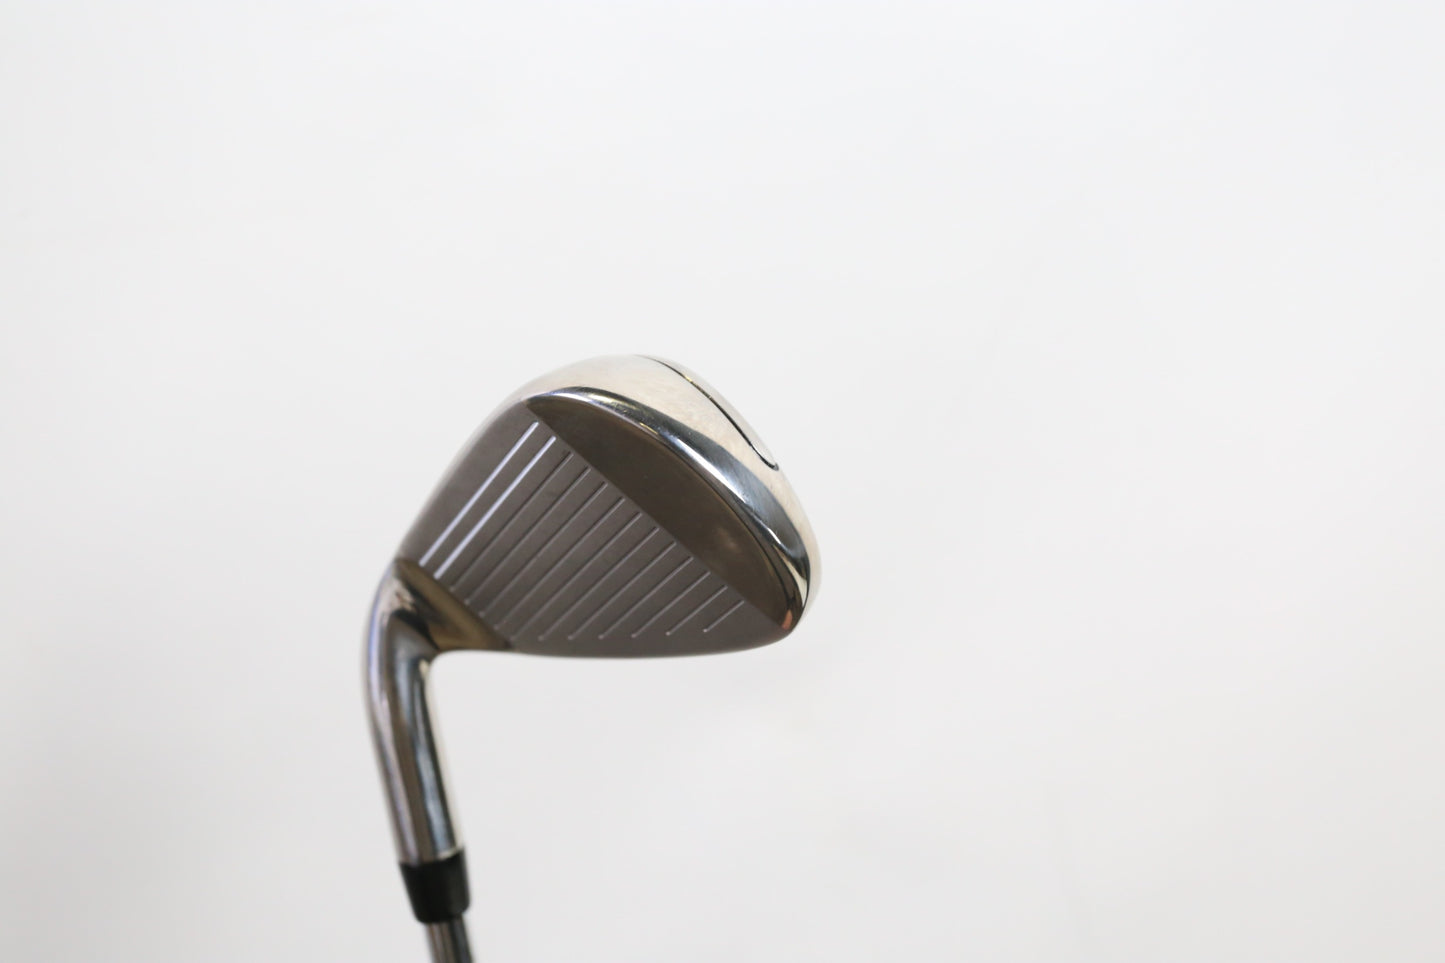 Used Callaway Rogue ST MAX OS Single 7-Iron - Right-Handed - Regular Flex